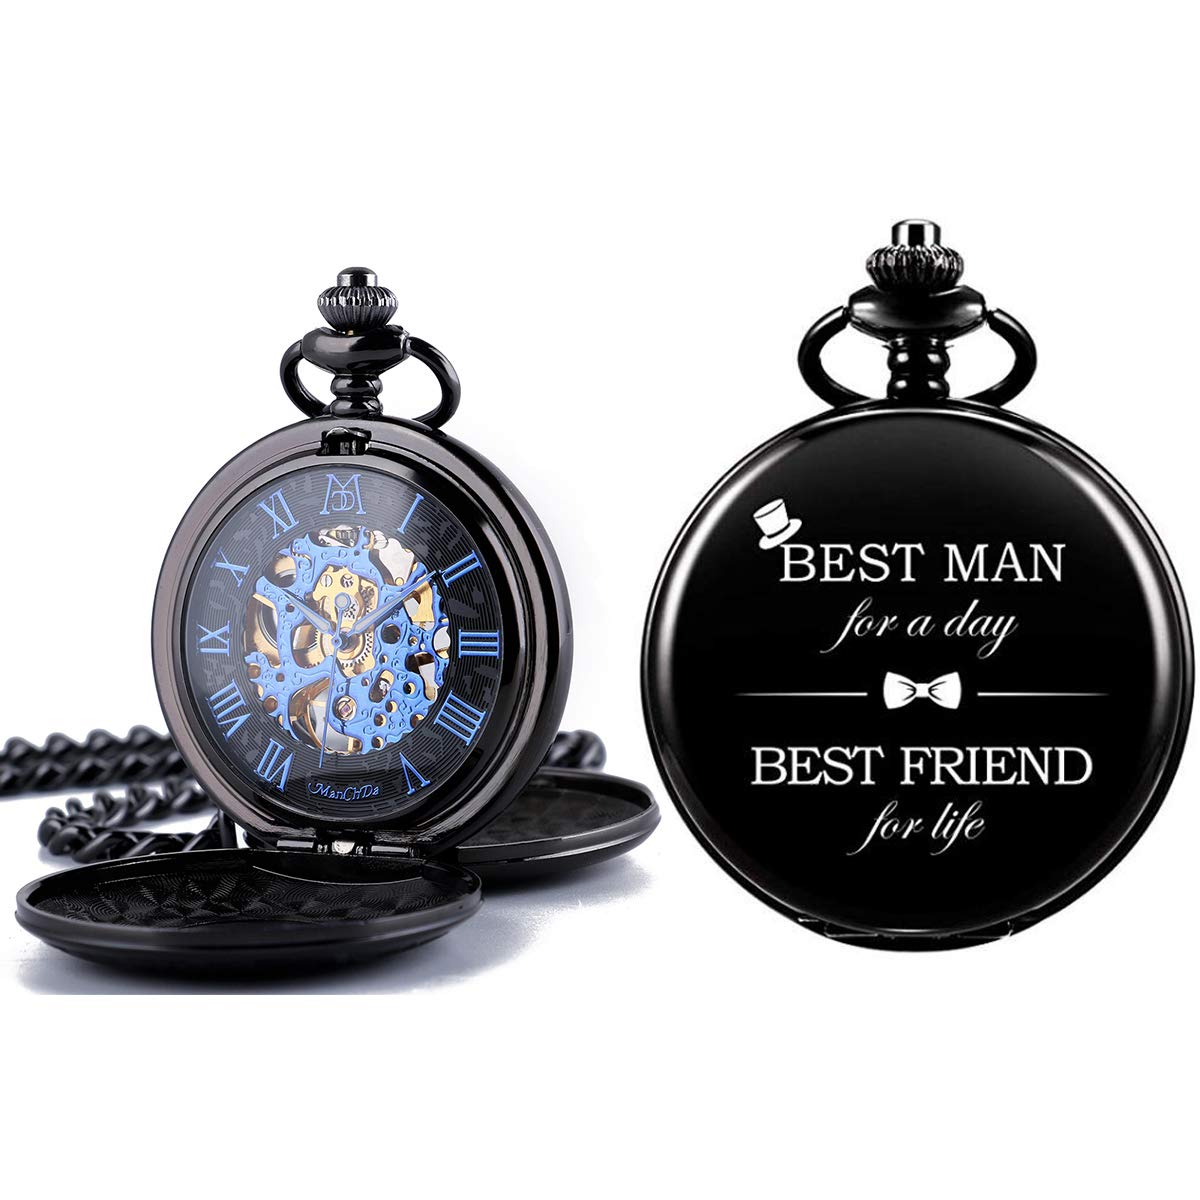 ManChDa Mechanical Double Cover Roman Numerals Dial Skeleton Engraved Pocket Watches with Box and Chain Personalized Custom Engraving for Husband Groomsman Gifts for Men Best to My Love | King